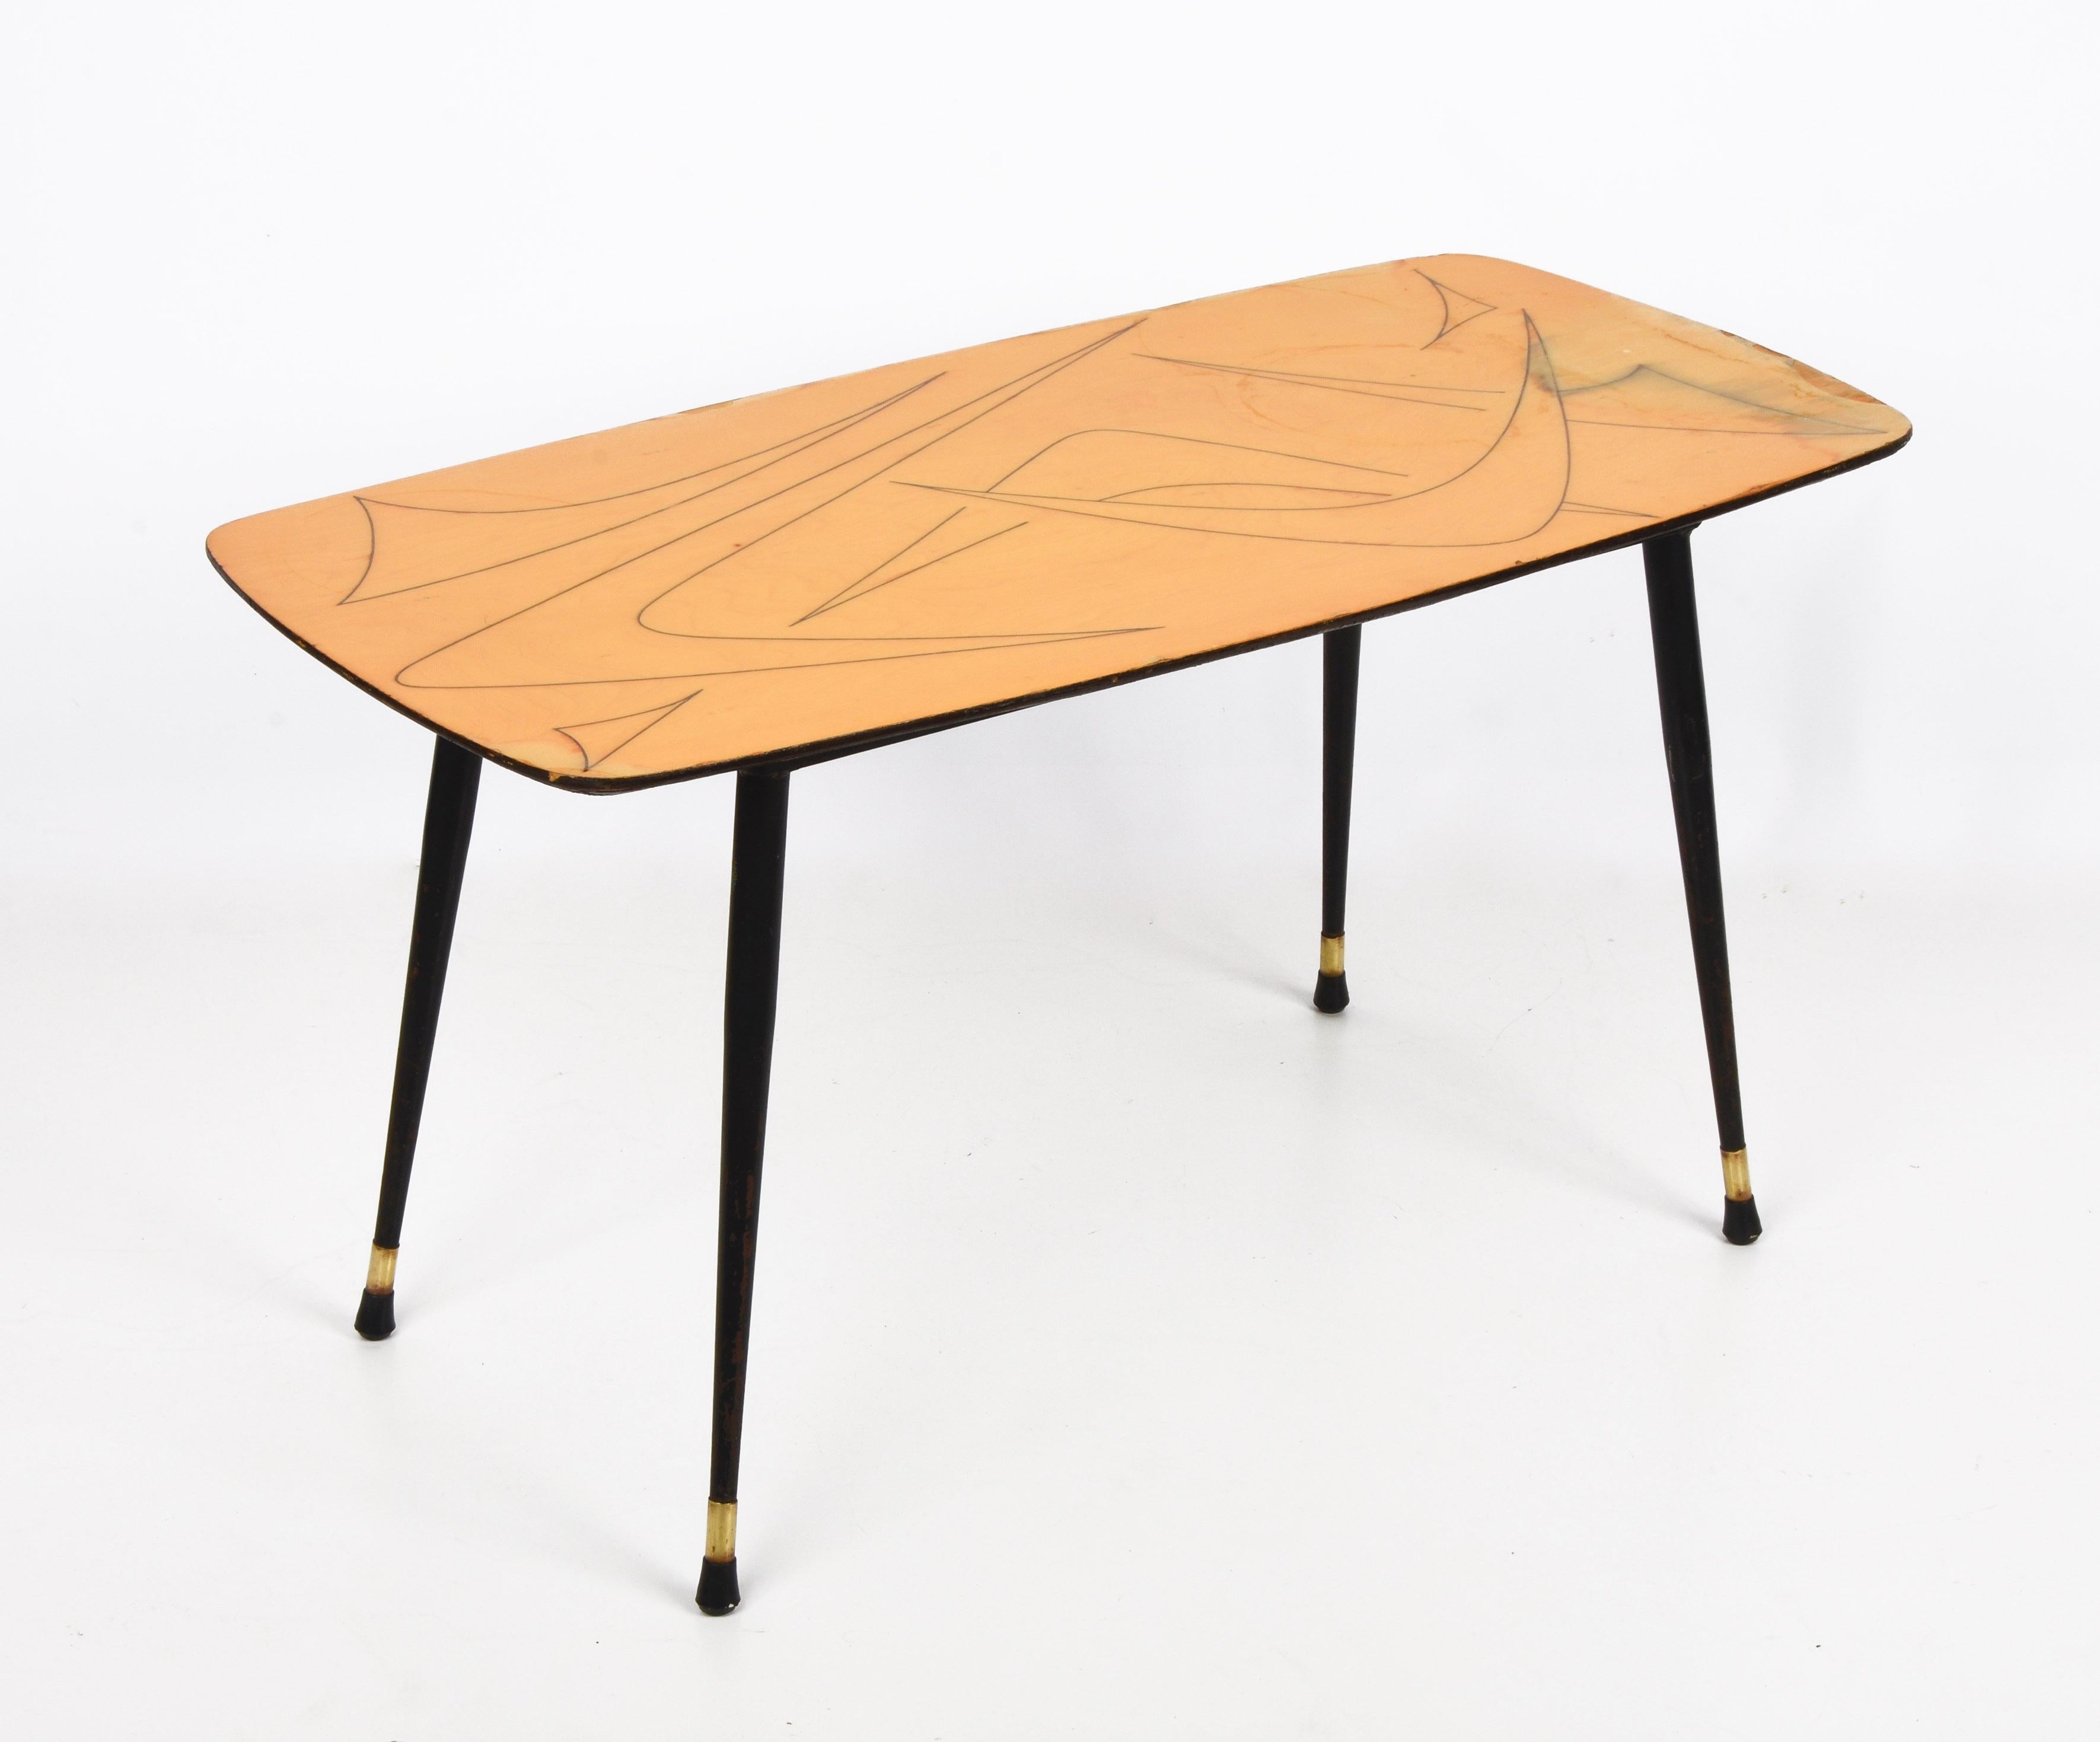 Midcentury Italian Painted Wood, Brass and Black Metal Coffee Table, 1950s For Sale 8